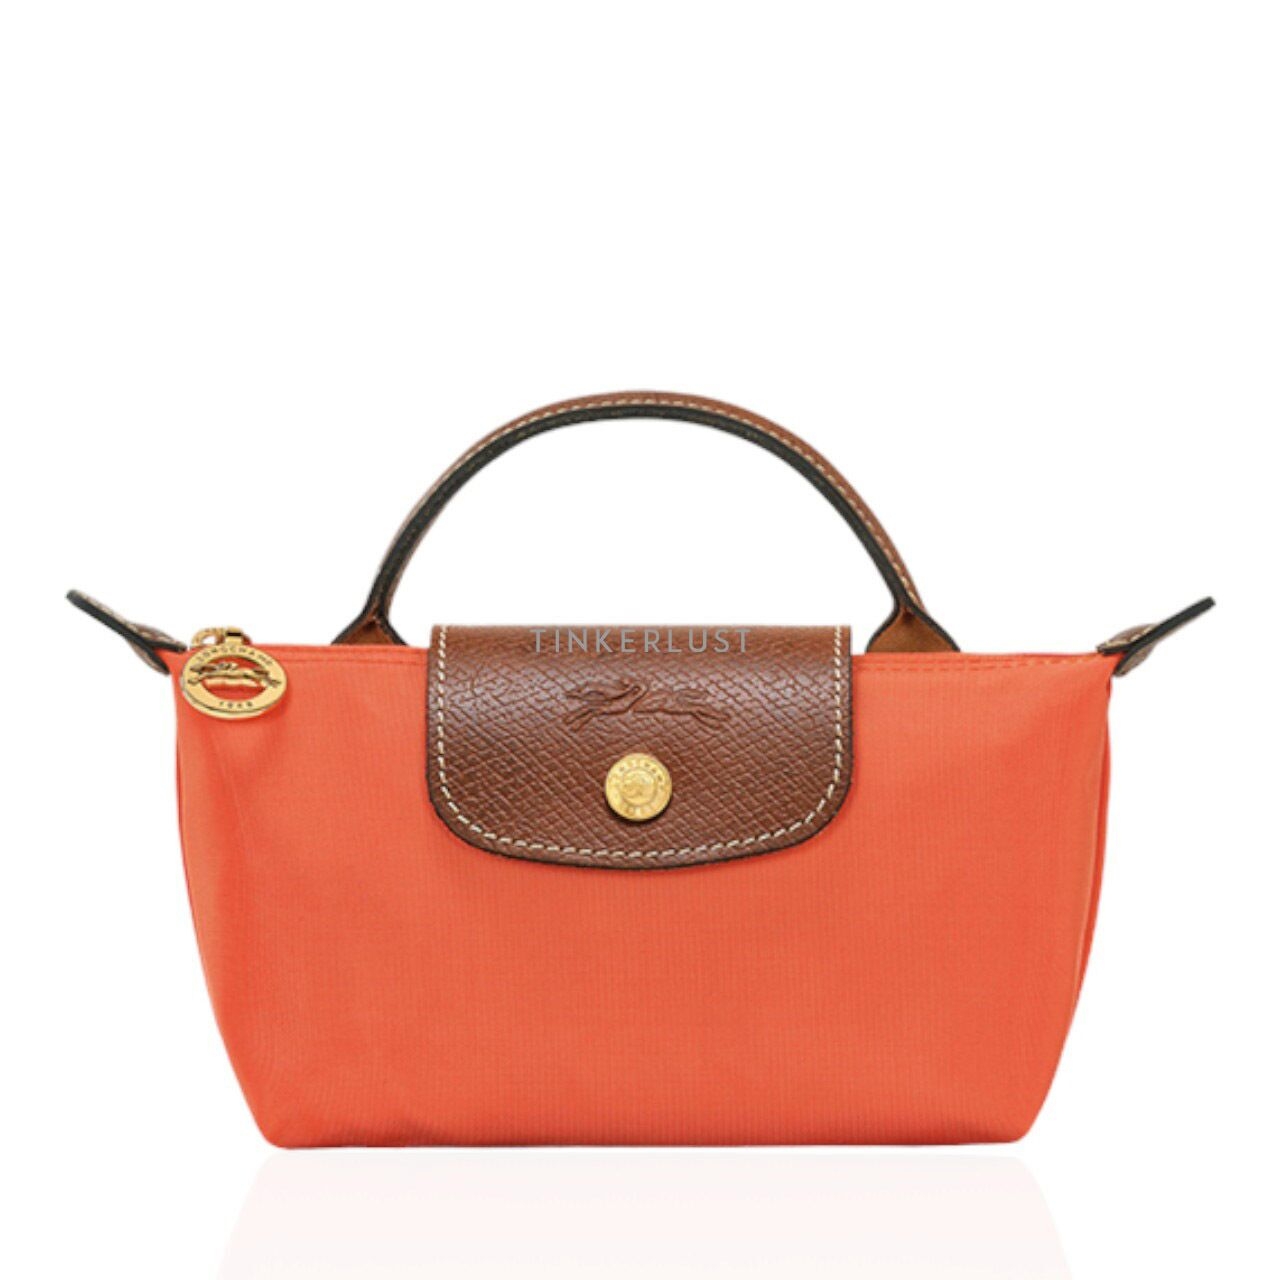 Longchamp Le Pliage Original Pouch in Orange Recycled Canvas with Handle